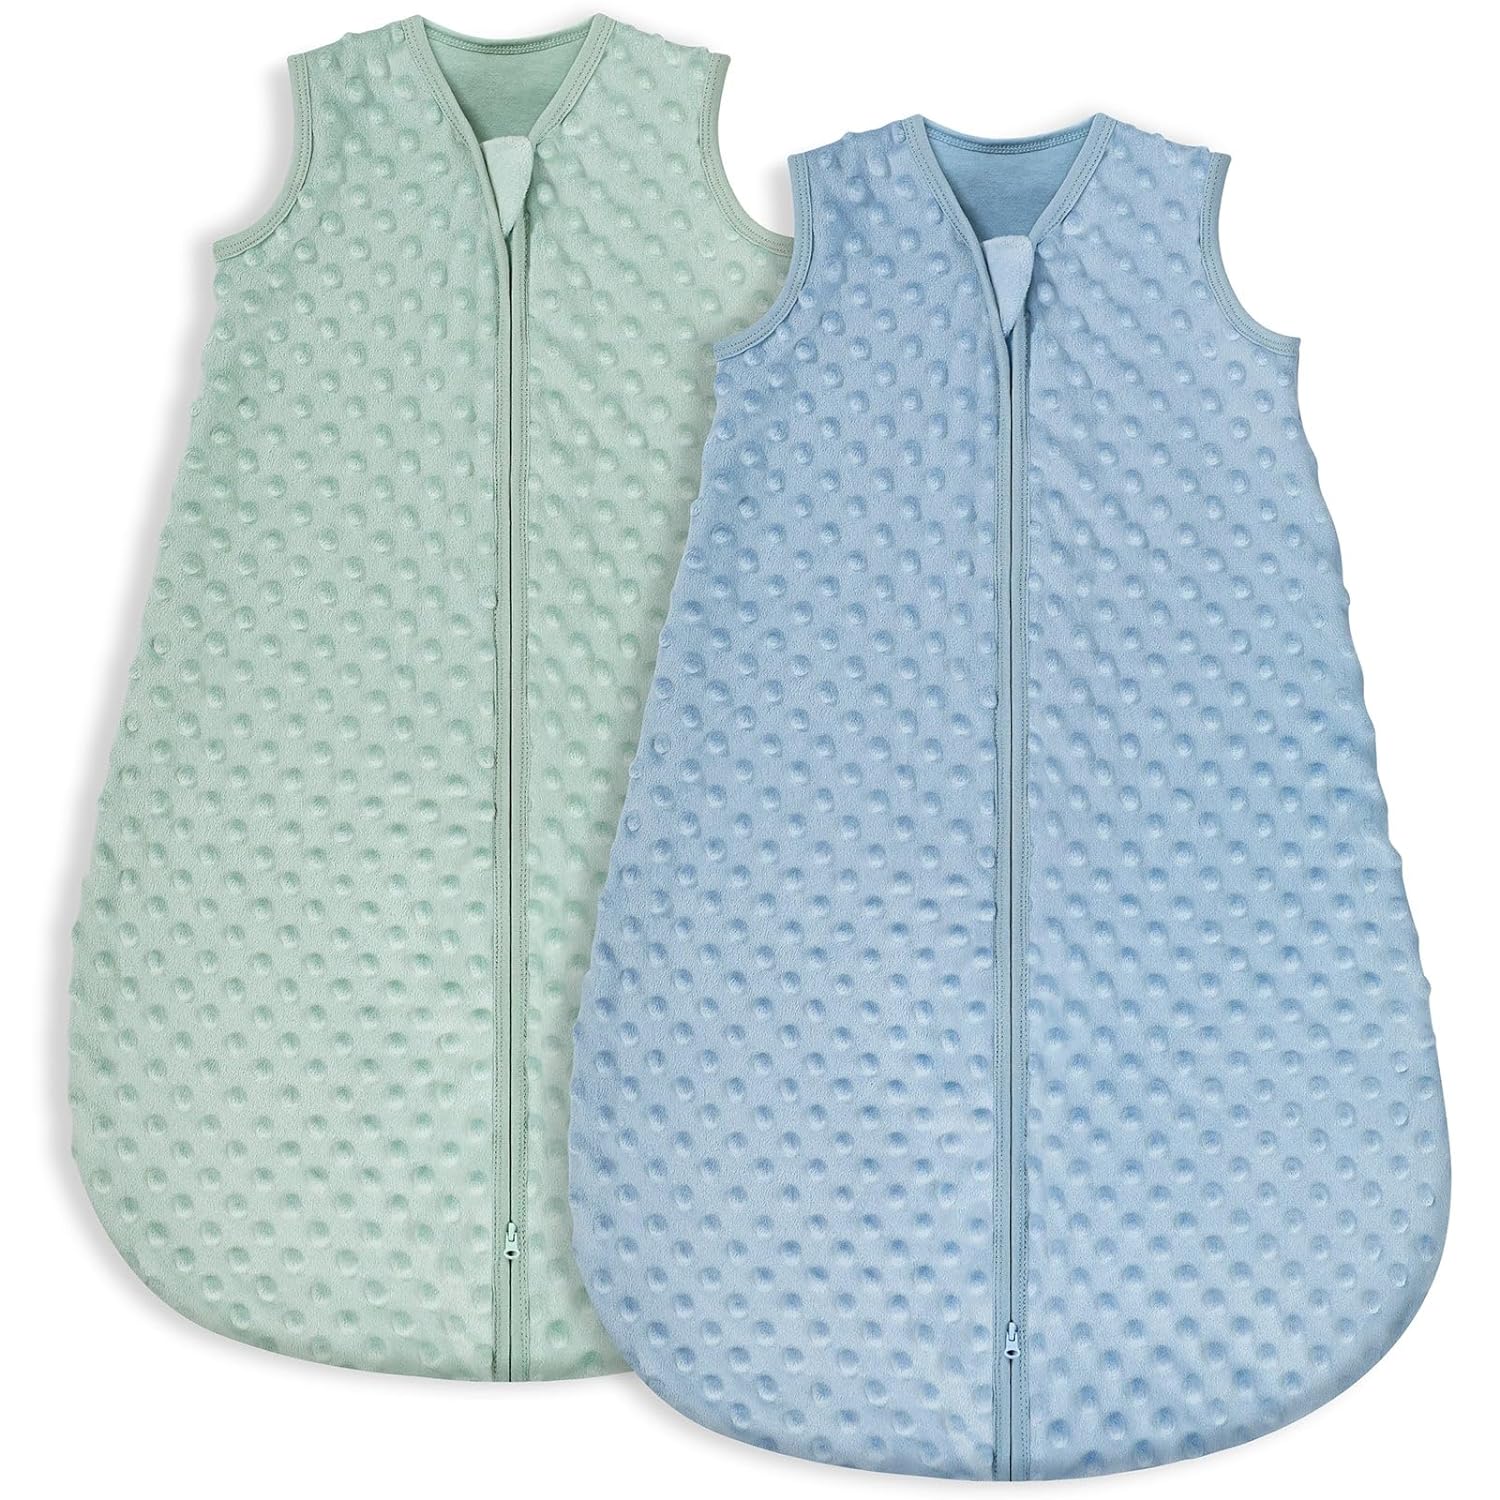 Yoofoss Baby Sleep Sack with Plush Dots, 2 Pack, TOG 1.5 Baby Wearable Blanket with 2-Way Zipper